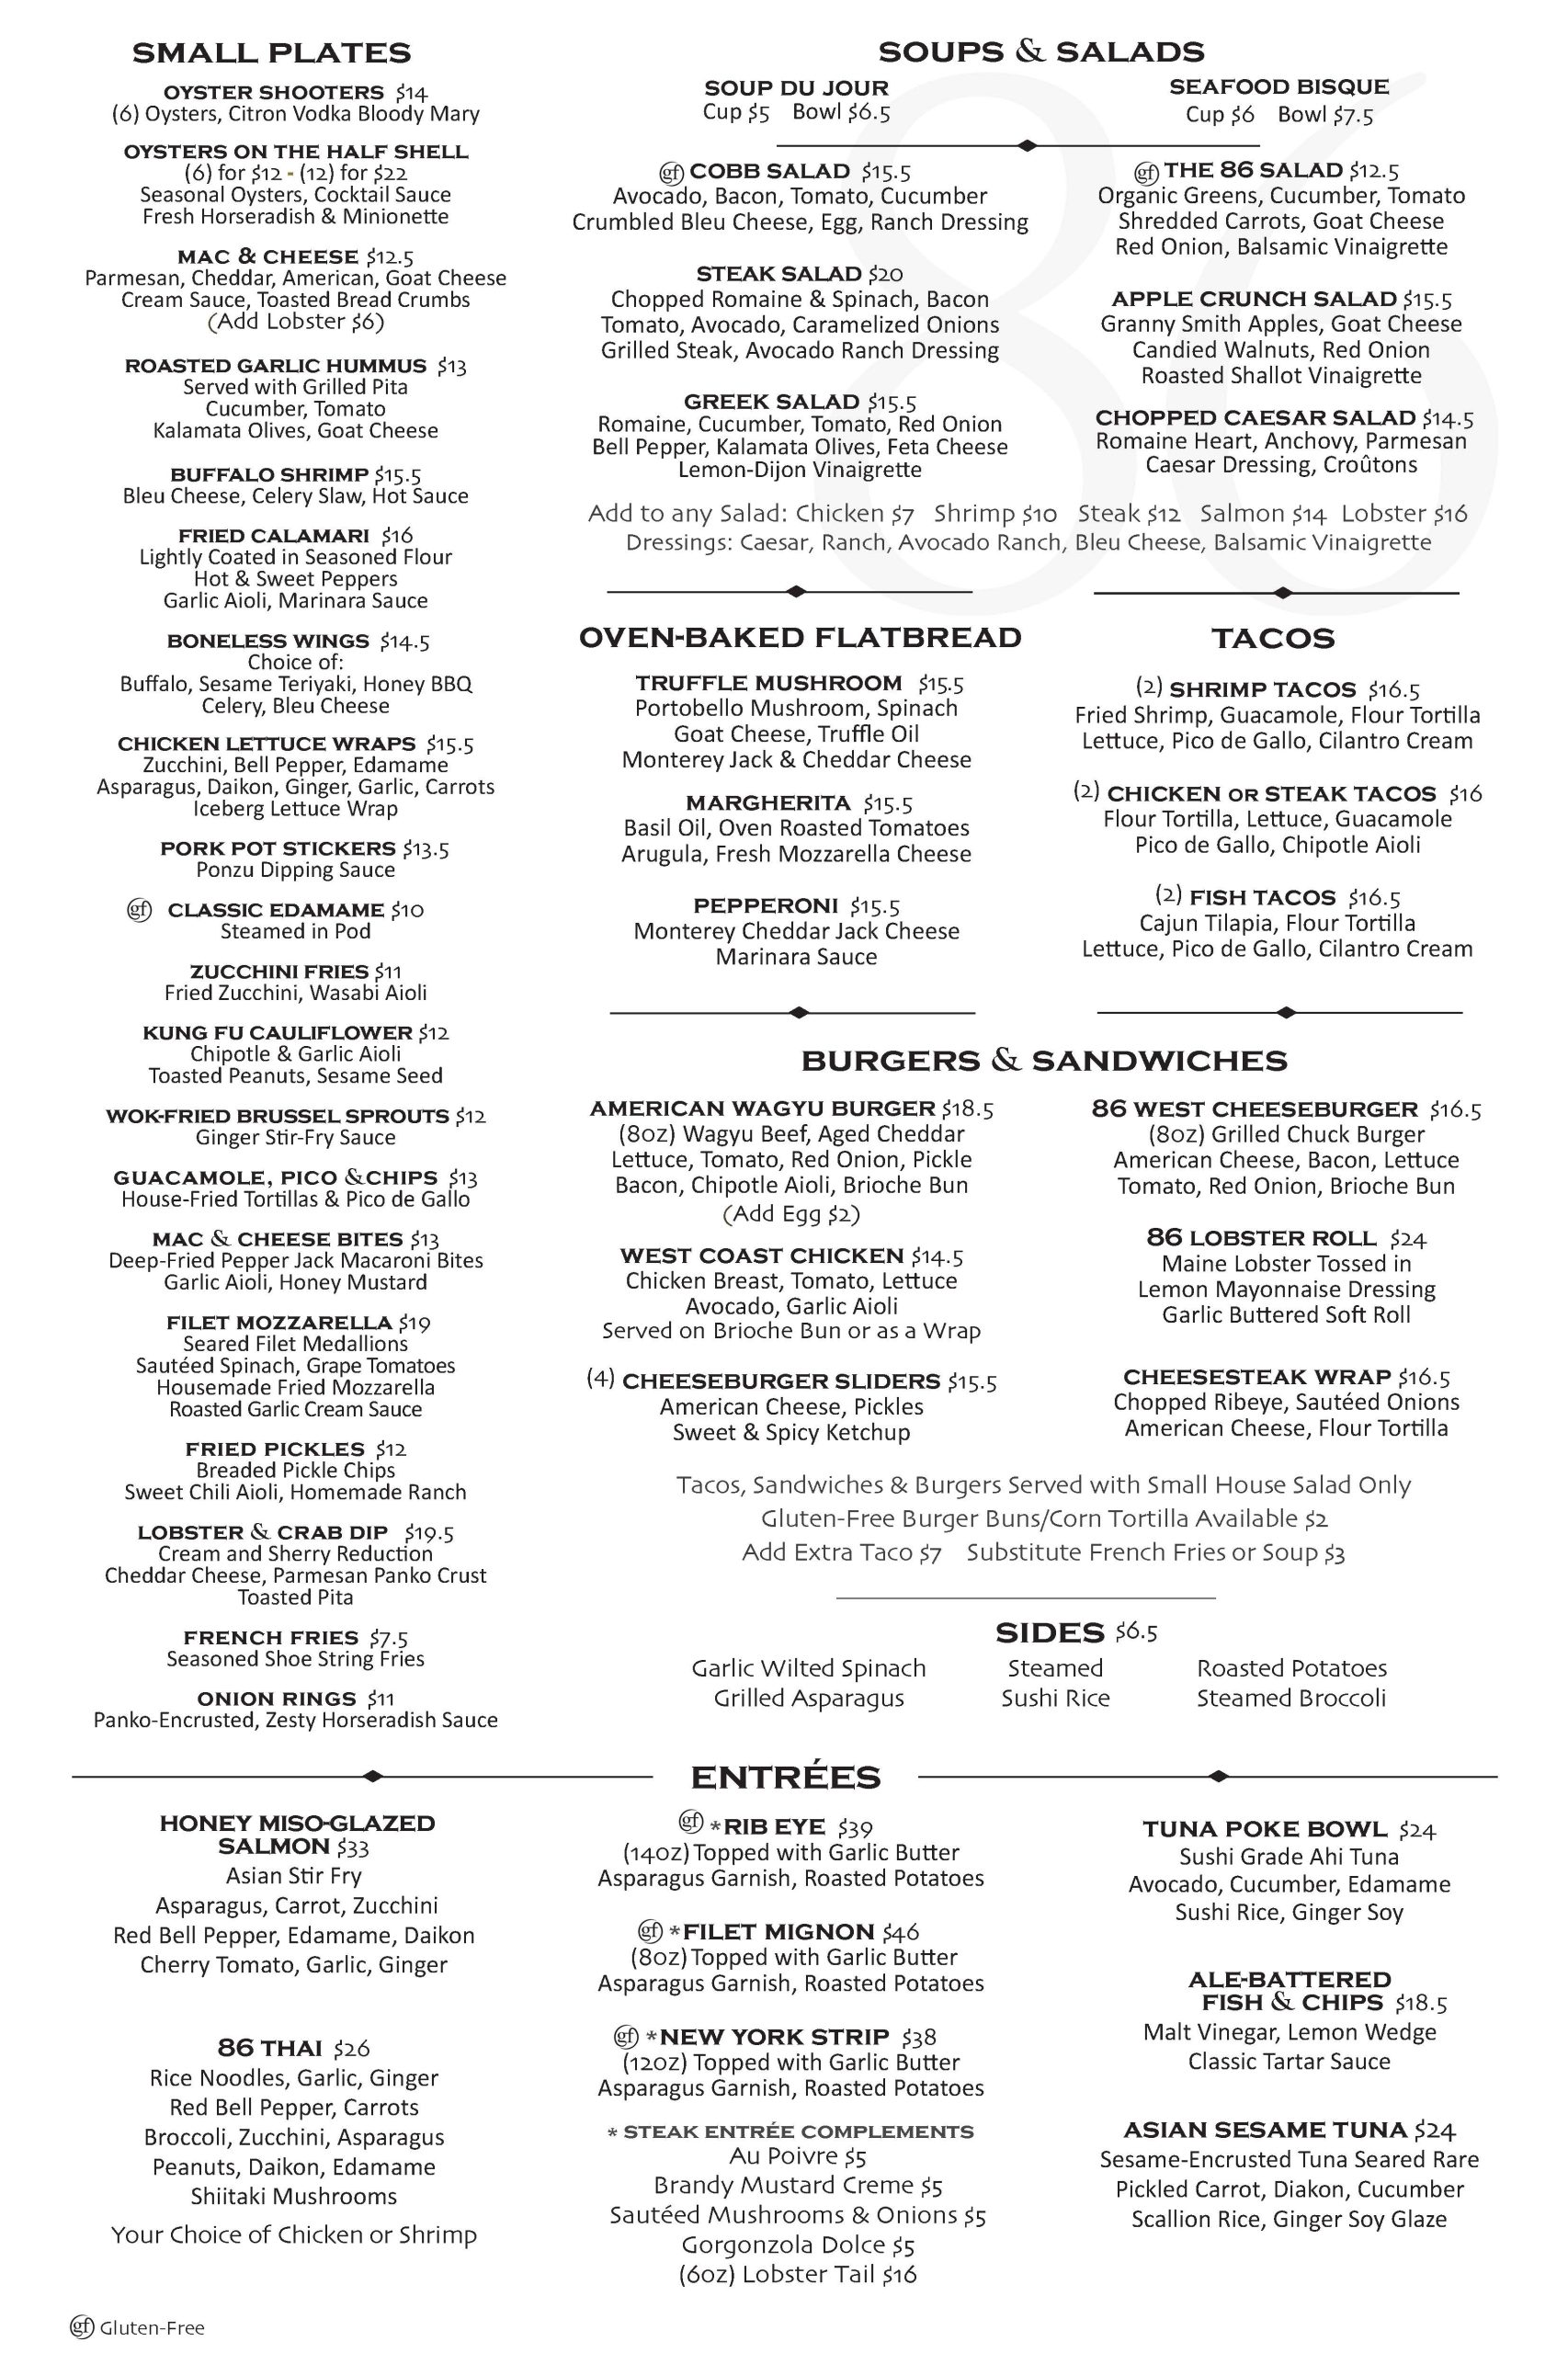 A restaurant menu featuring sections for small plates, soups and salads, oven-baked flatbread, tacos, burgers and sandwiches, entrees, and sides, with various meal and pricing options listed.